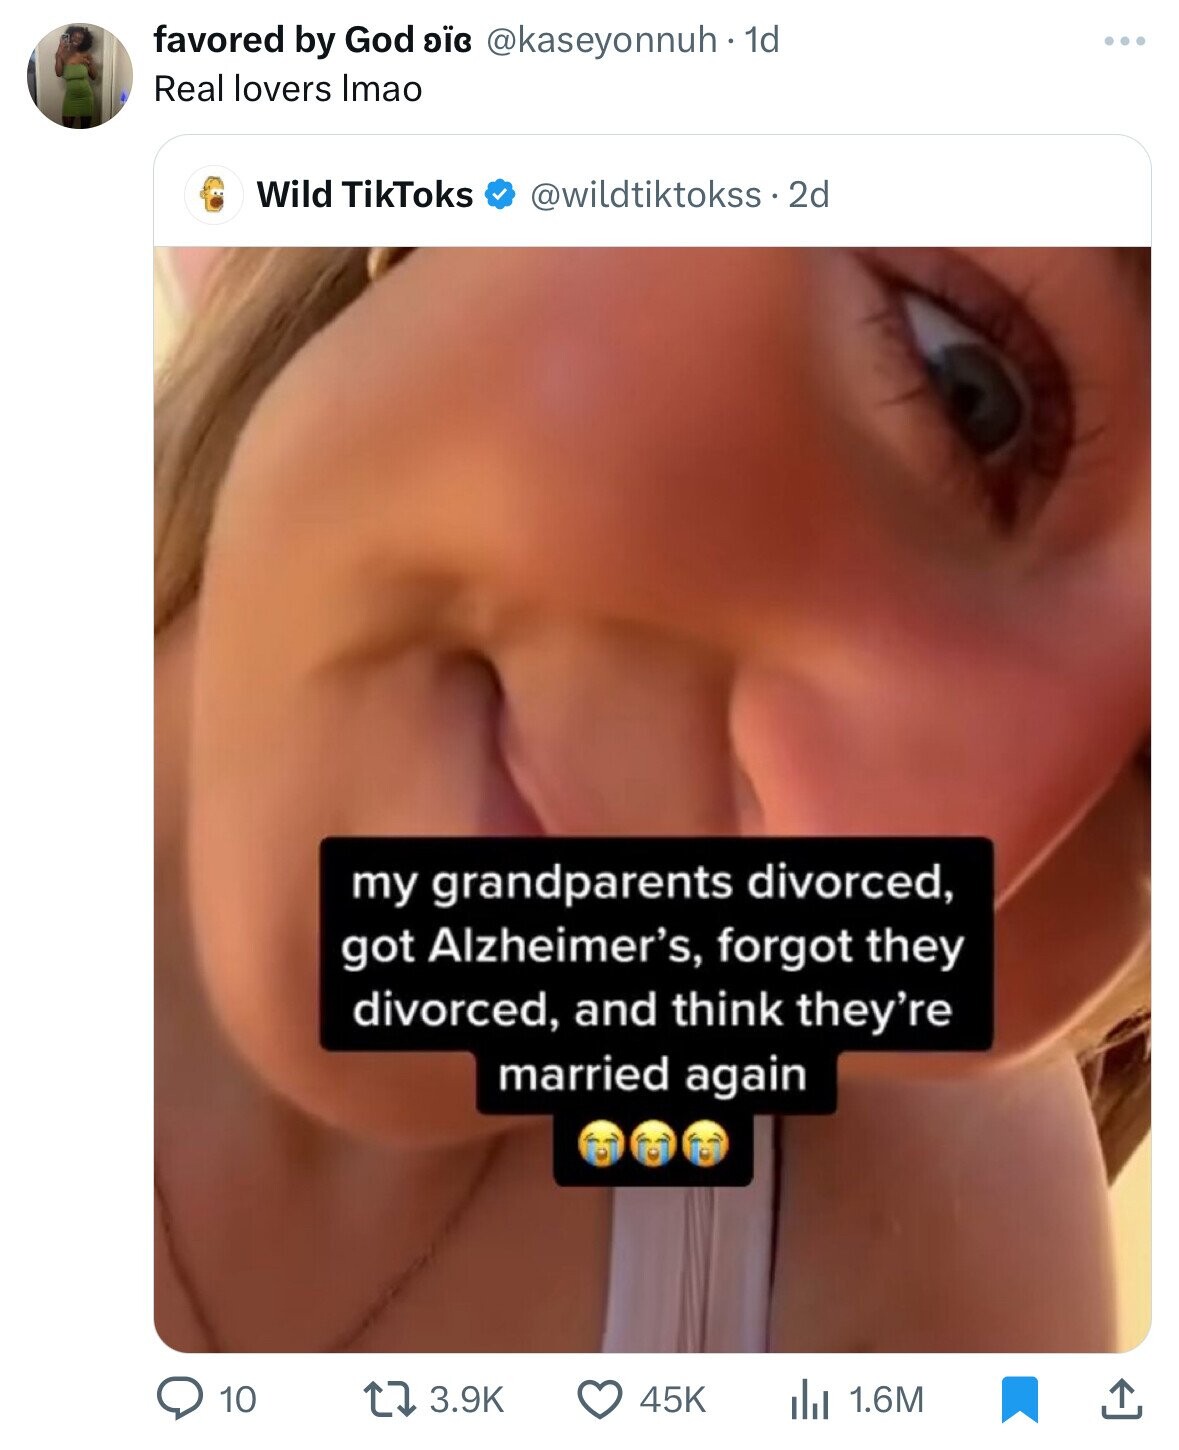 screenshot - favored by God oc . 1d Real lovers Imao Wild TikToks 2d my grandparents divorced, got Alzheimer's, forgot they divorced, and think they're married again 10 45K lu 1.6M 1